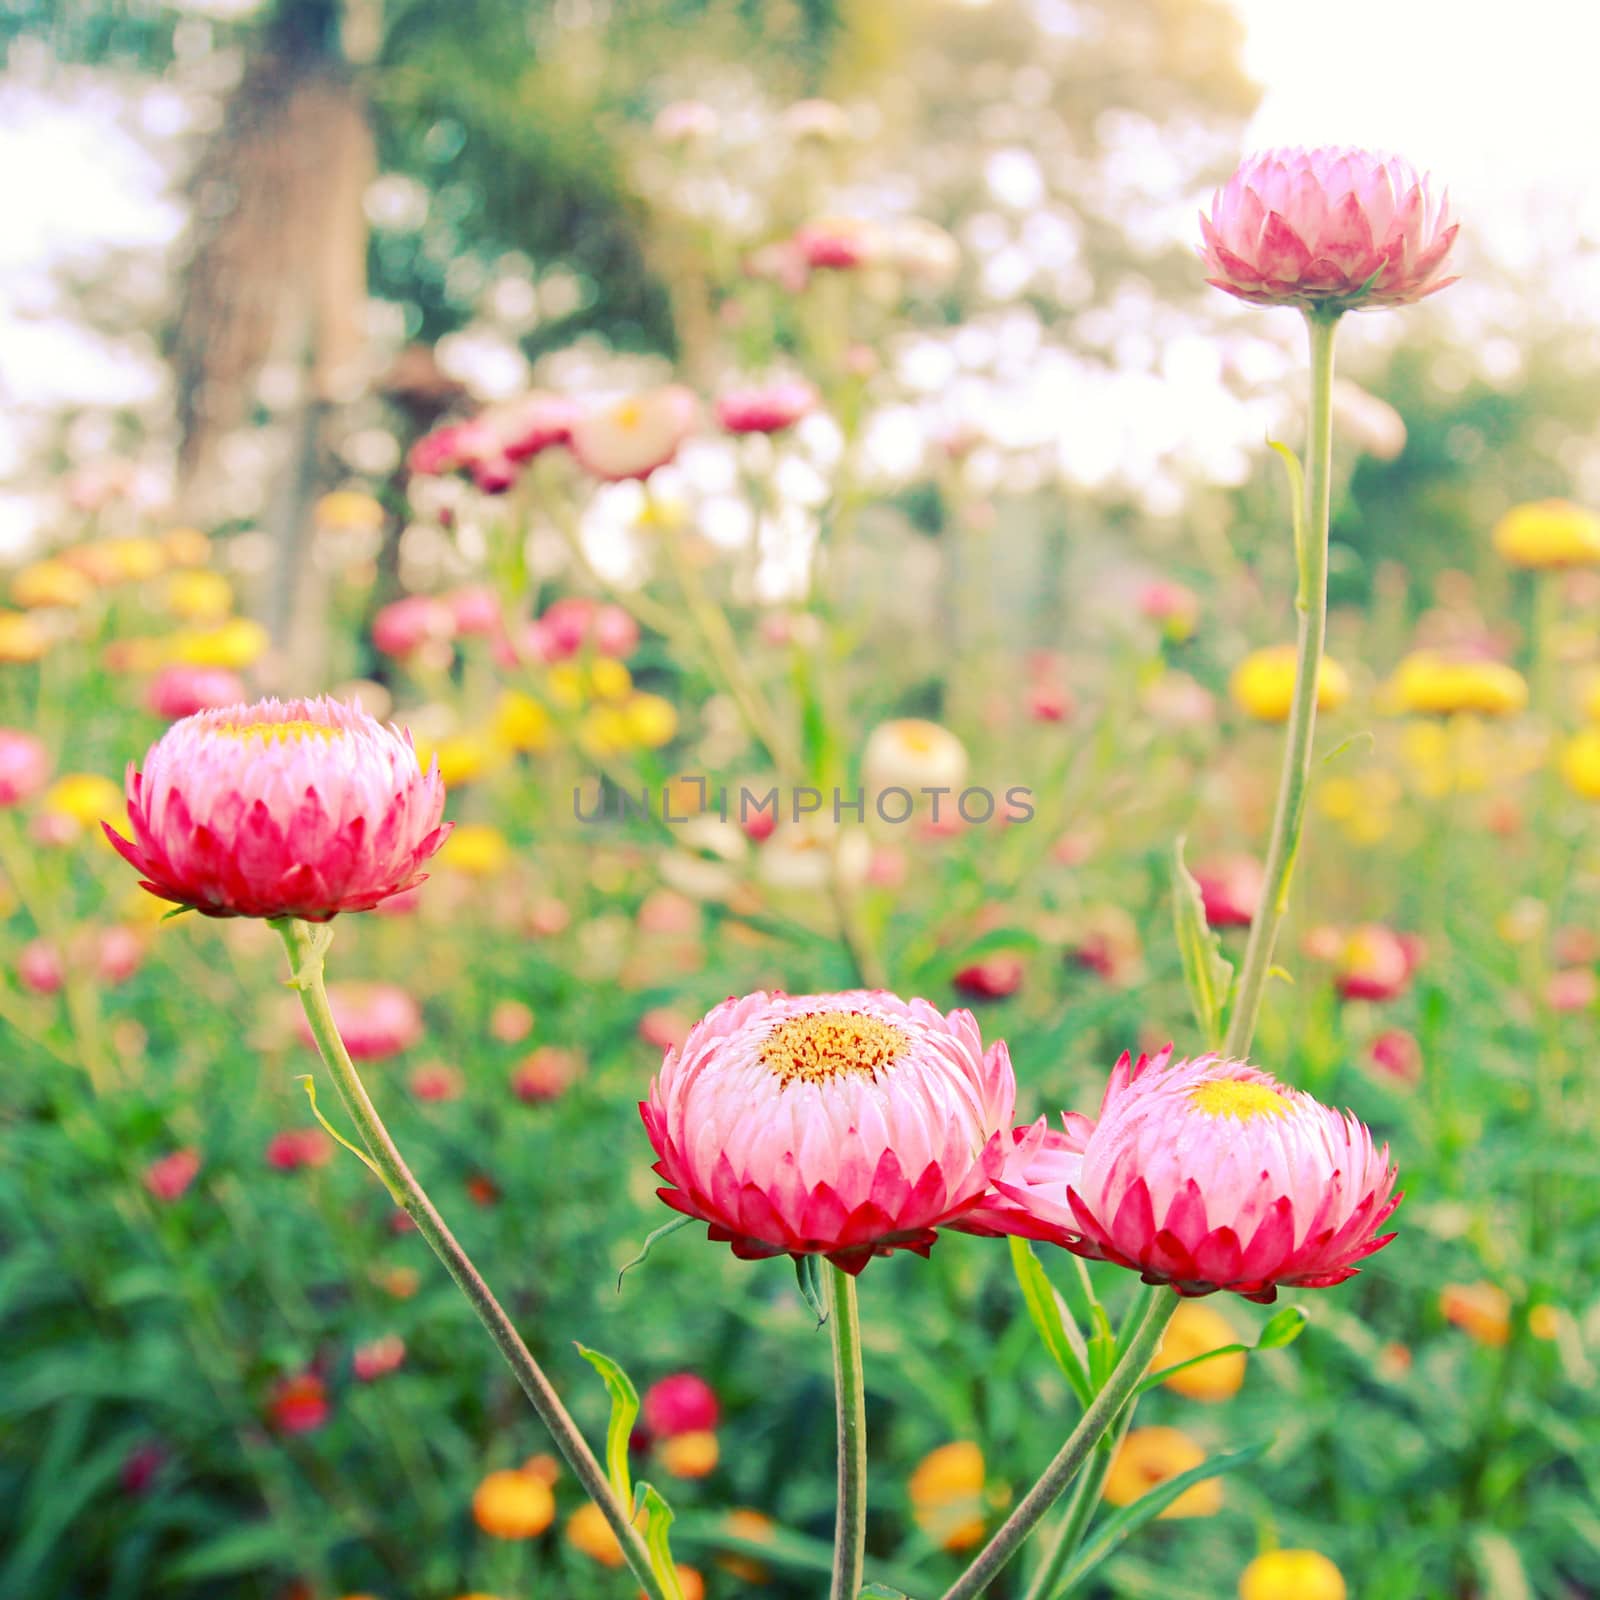 Small flowers in garden with retro filter effect 